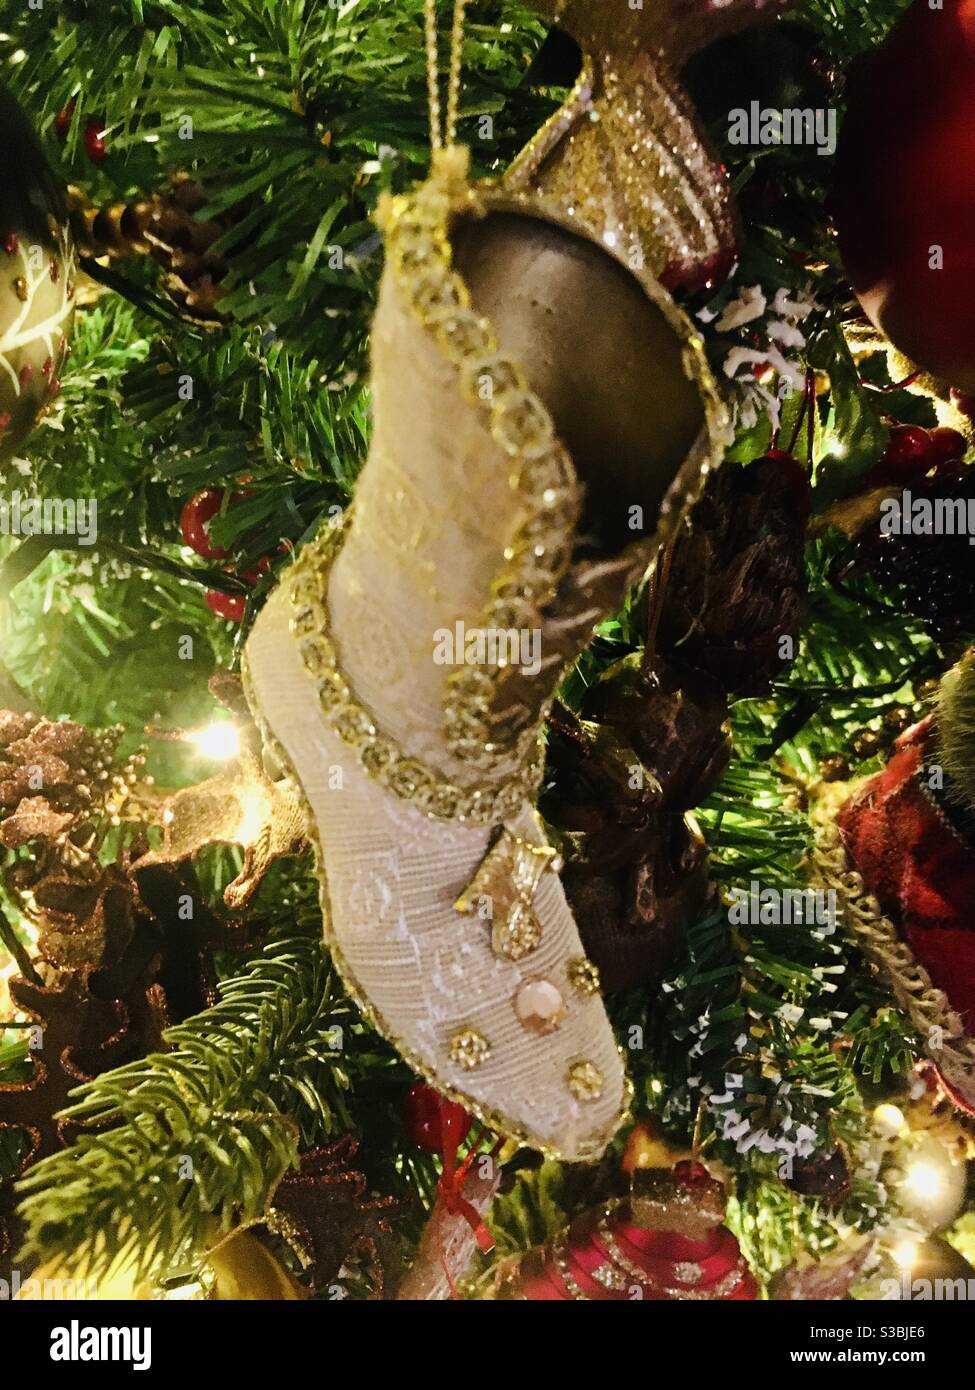 Victorian style Christmas tree decoration- Victorian style boot Stock Photo